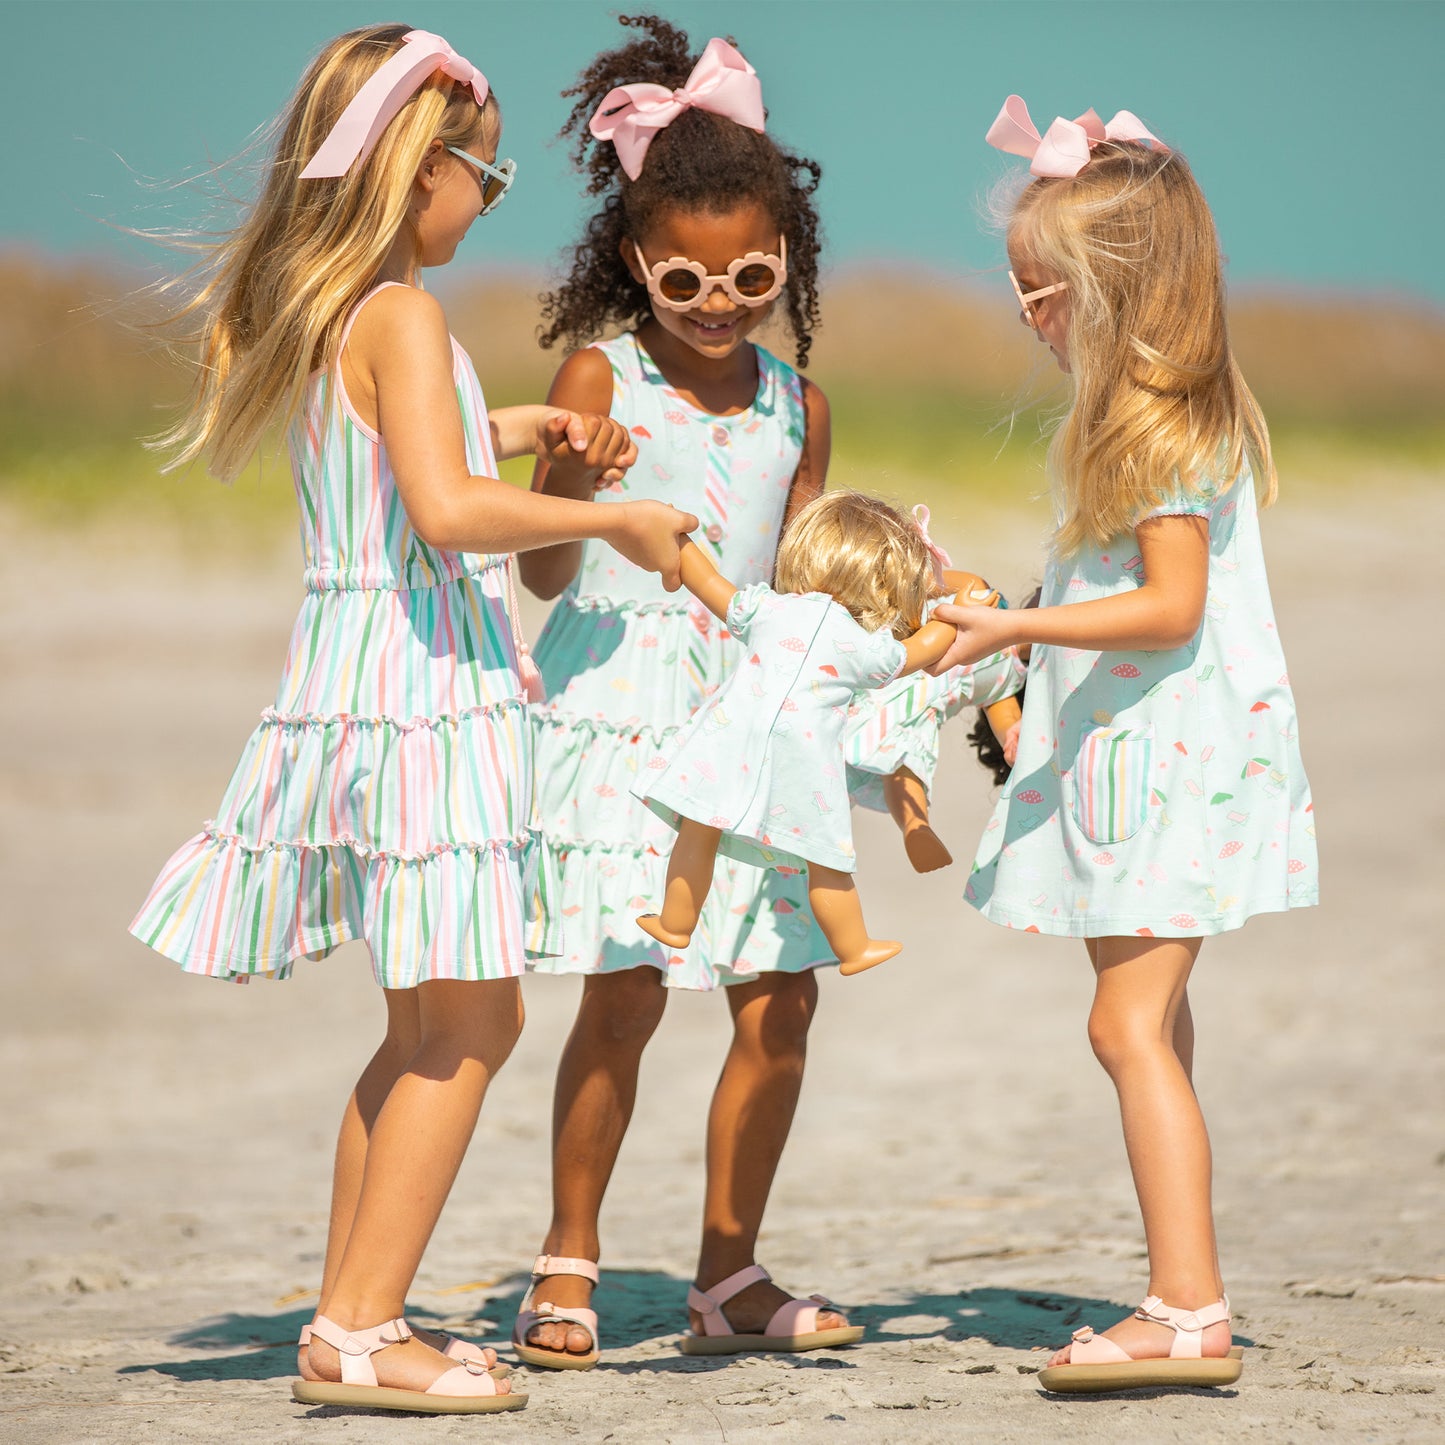 three little girls on the beach playing with a doll 